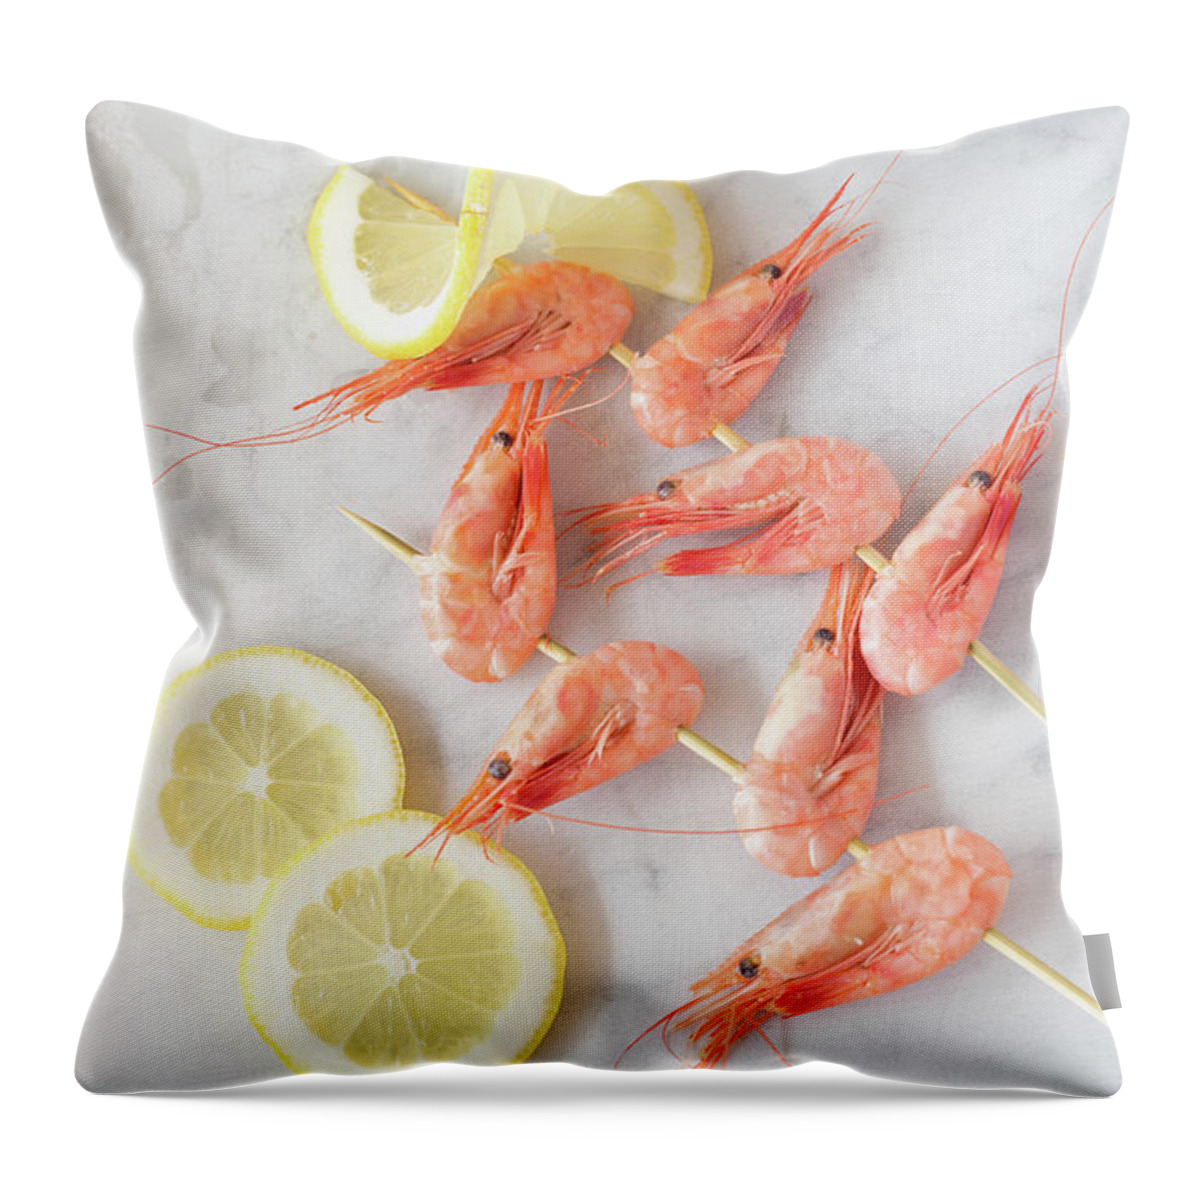 Norway Throw Pillow featuring the photograph Shrimp by Elin Enger